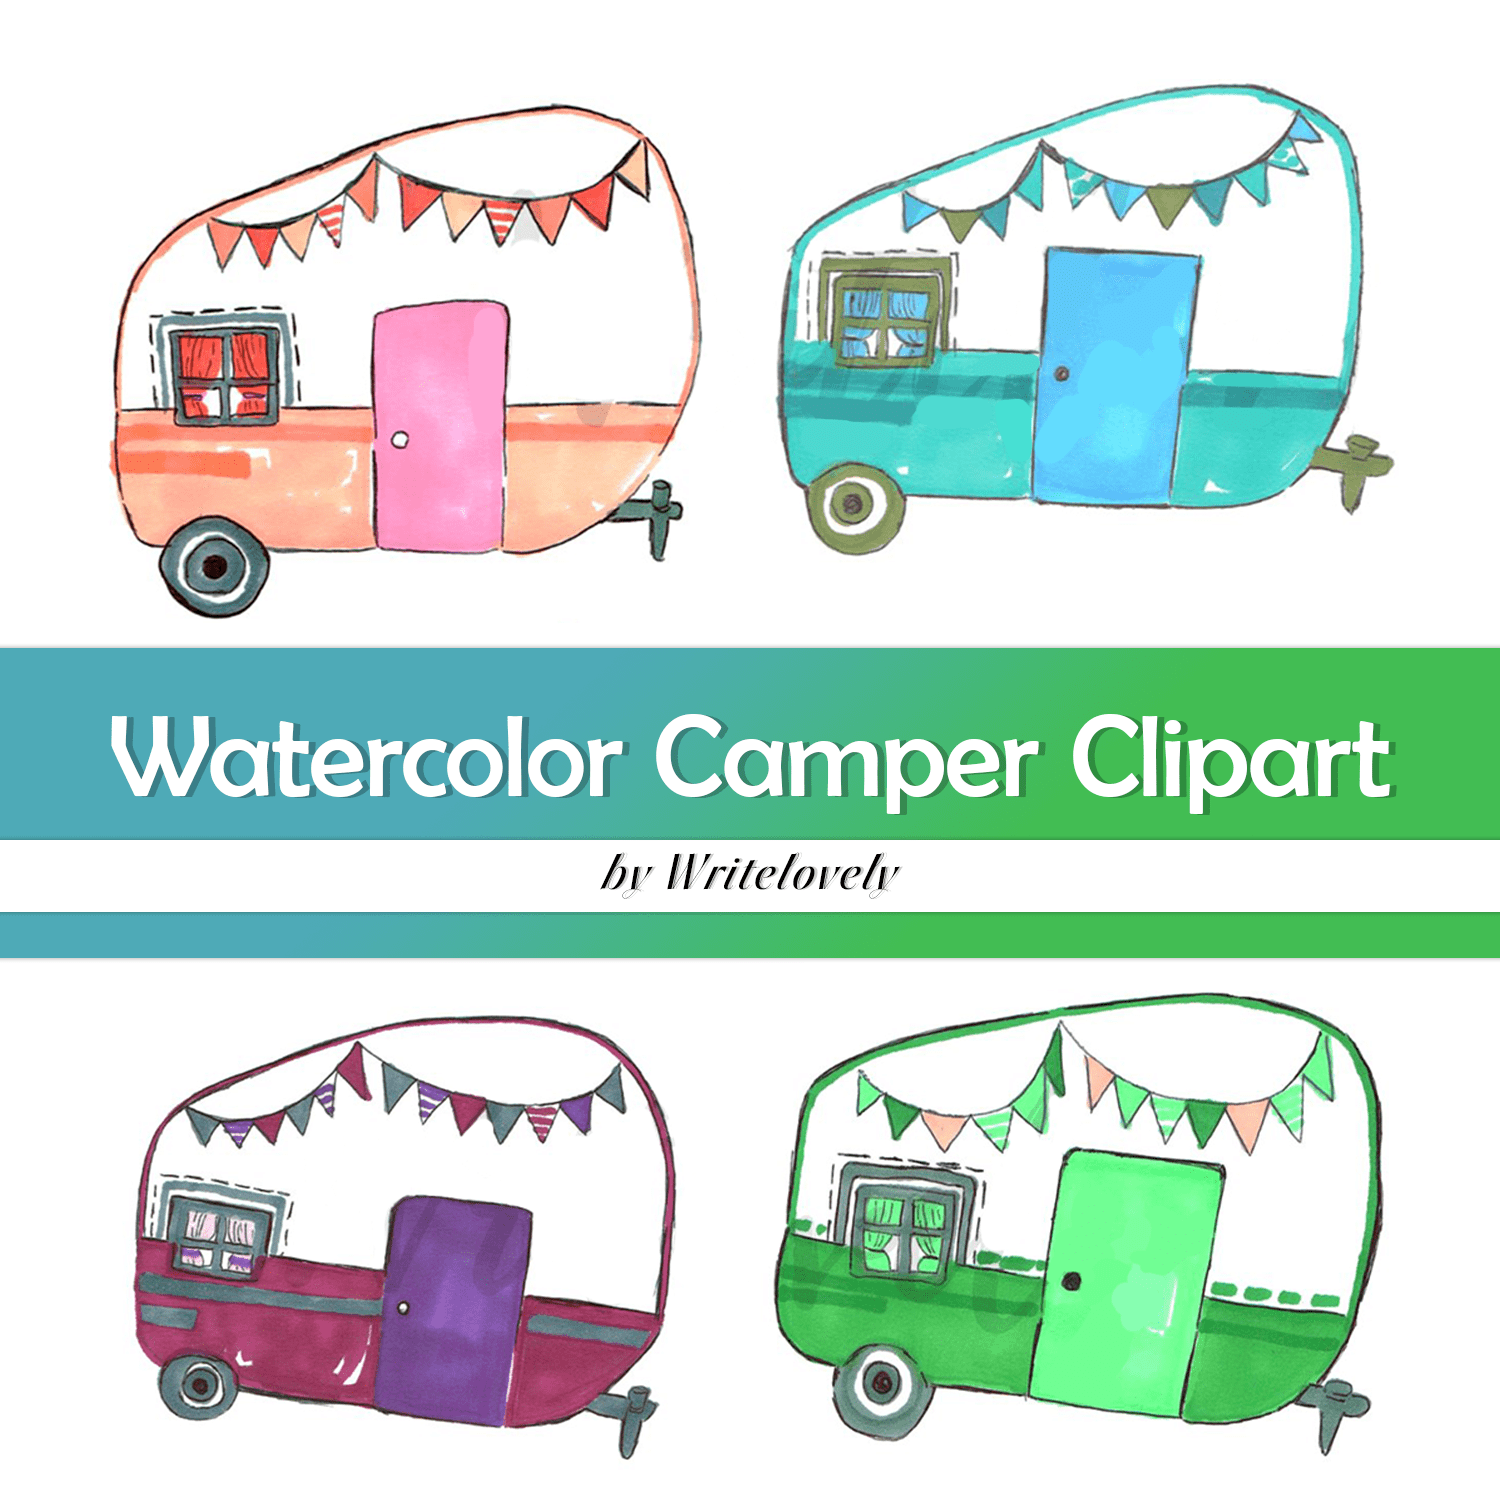 Watercolor Camper Clipart created by Writelovely.